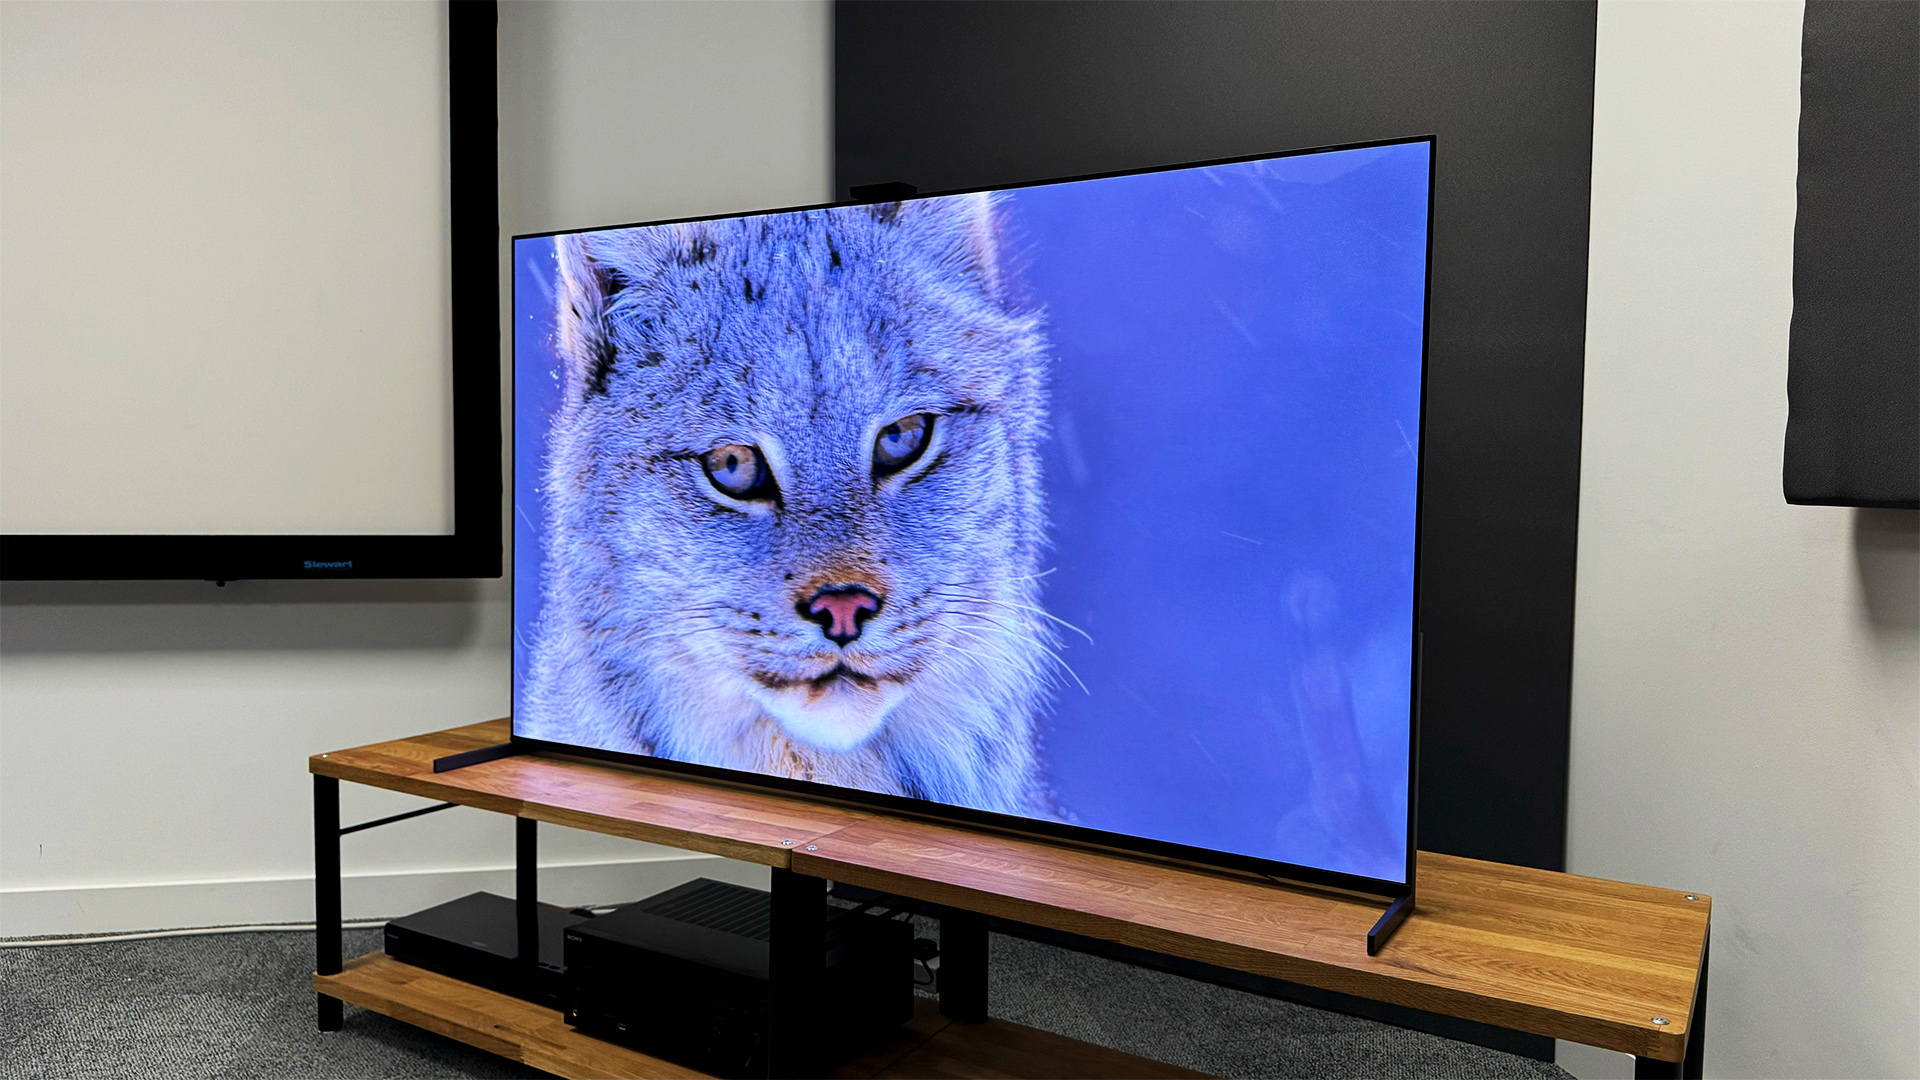 Samsung S95B OLED 4K TV Review: High-End Picture With Quantum Dot Color